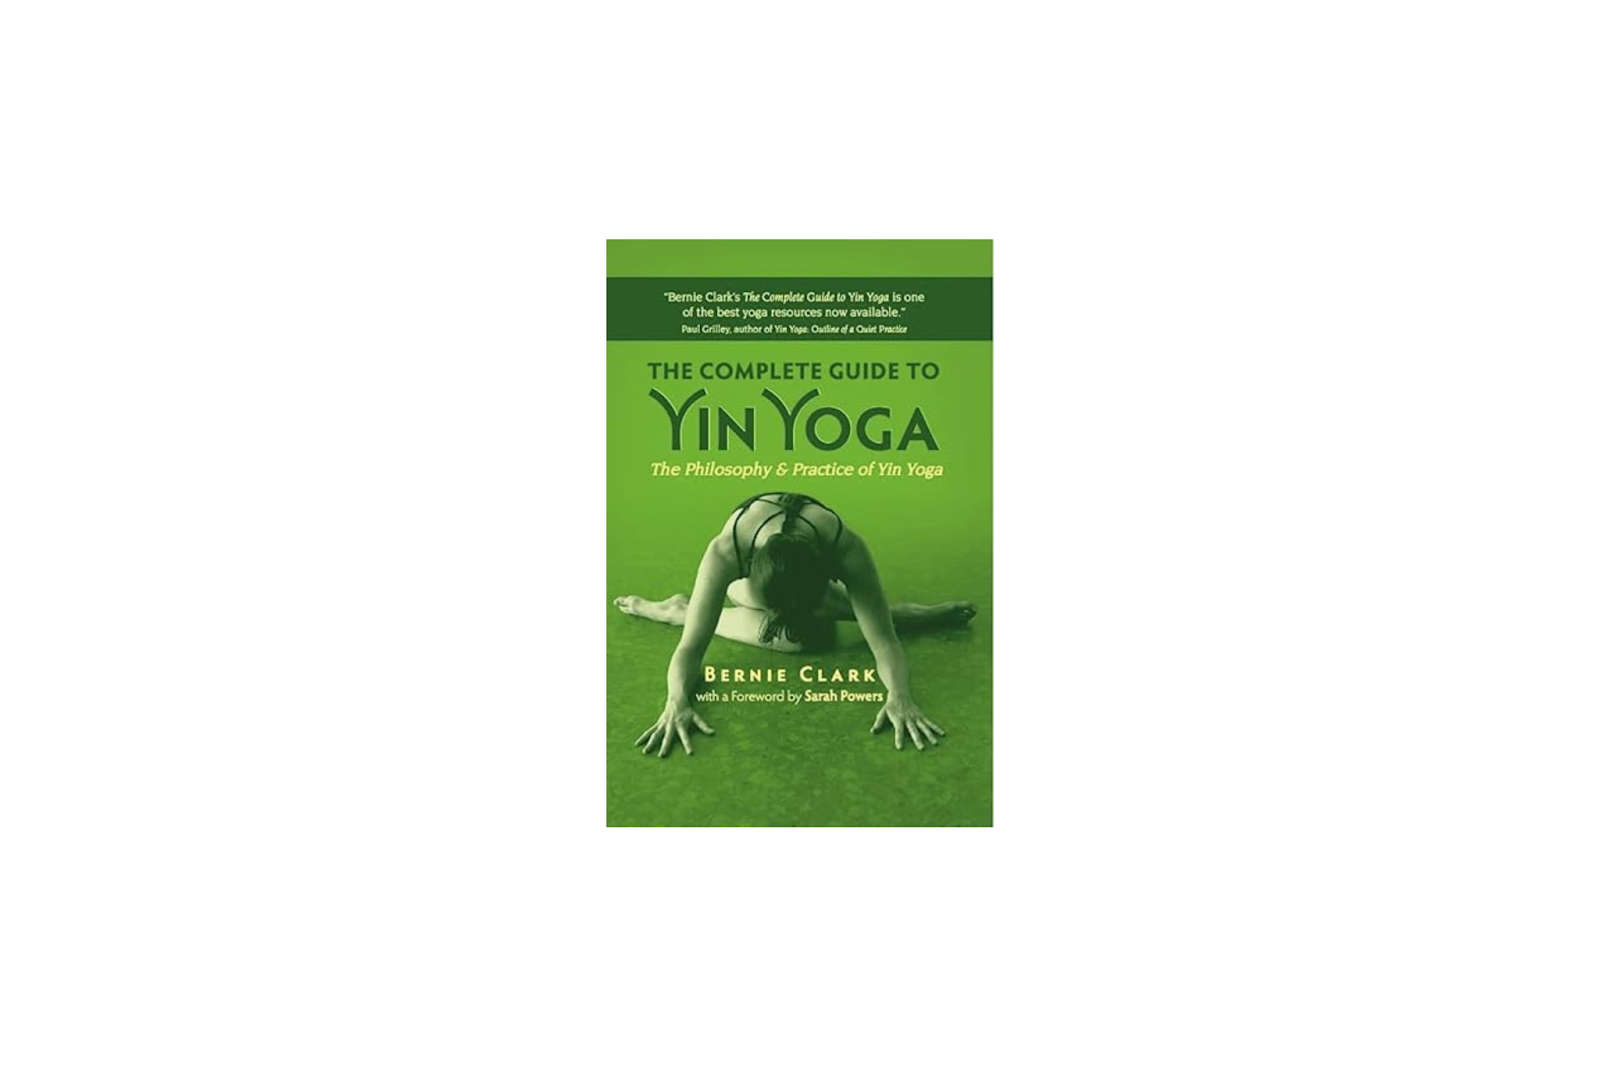 The Complete Guide To Yin Yoga by Bernie Clark